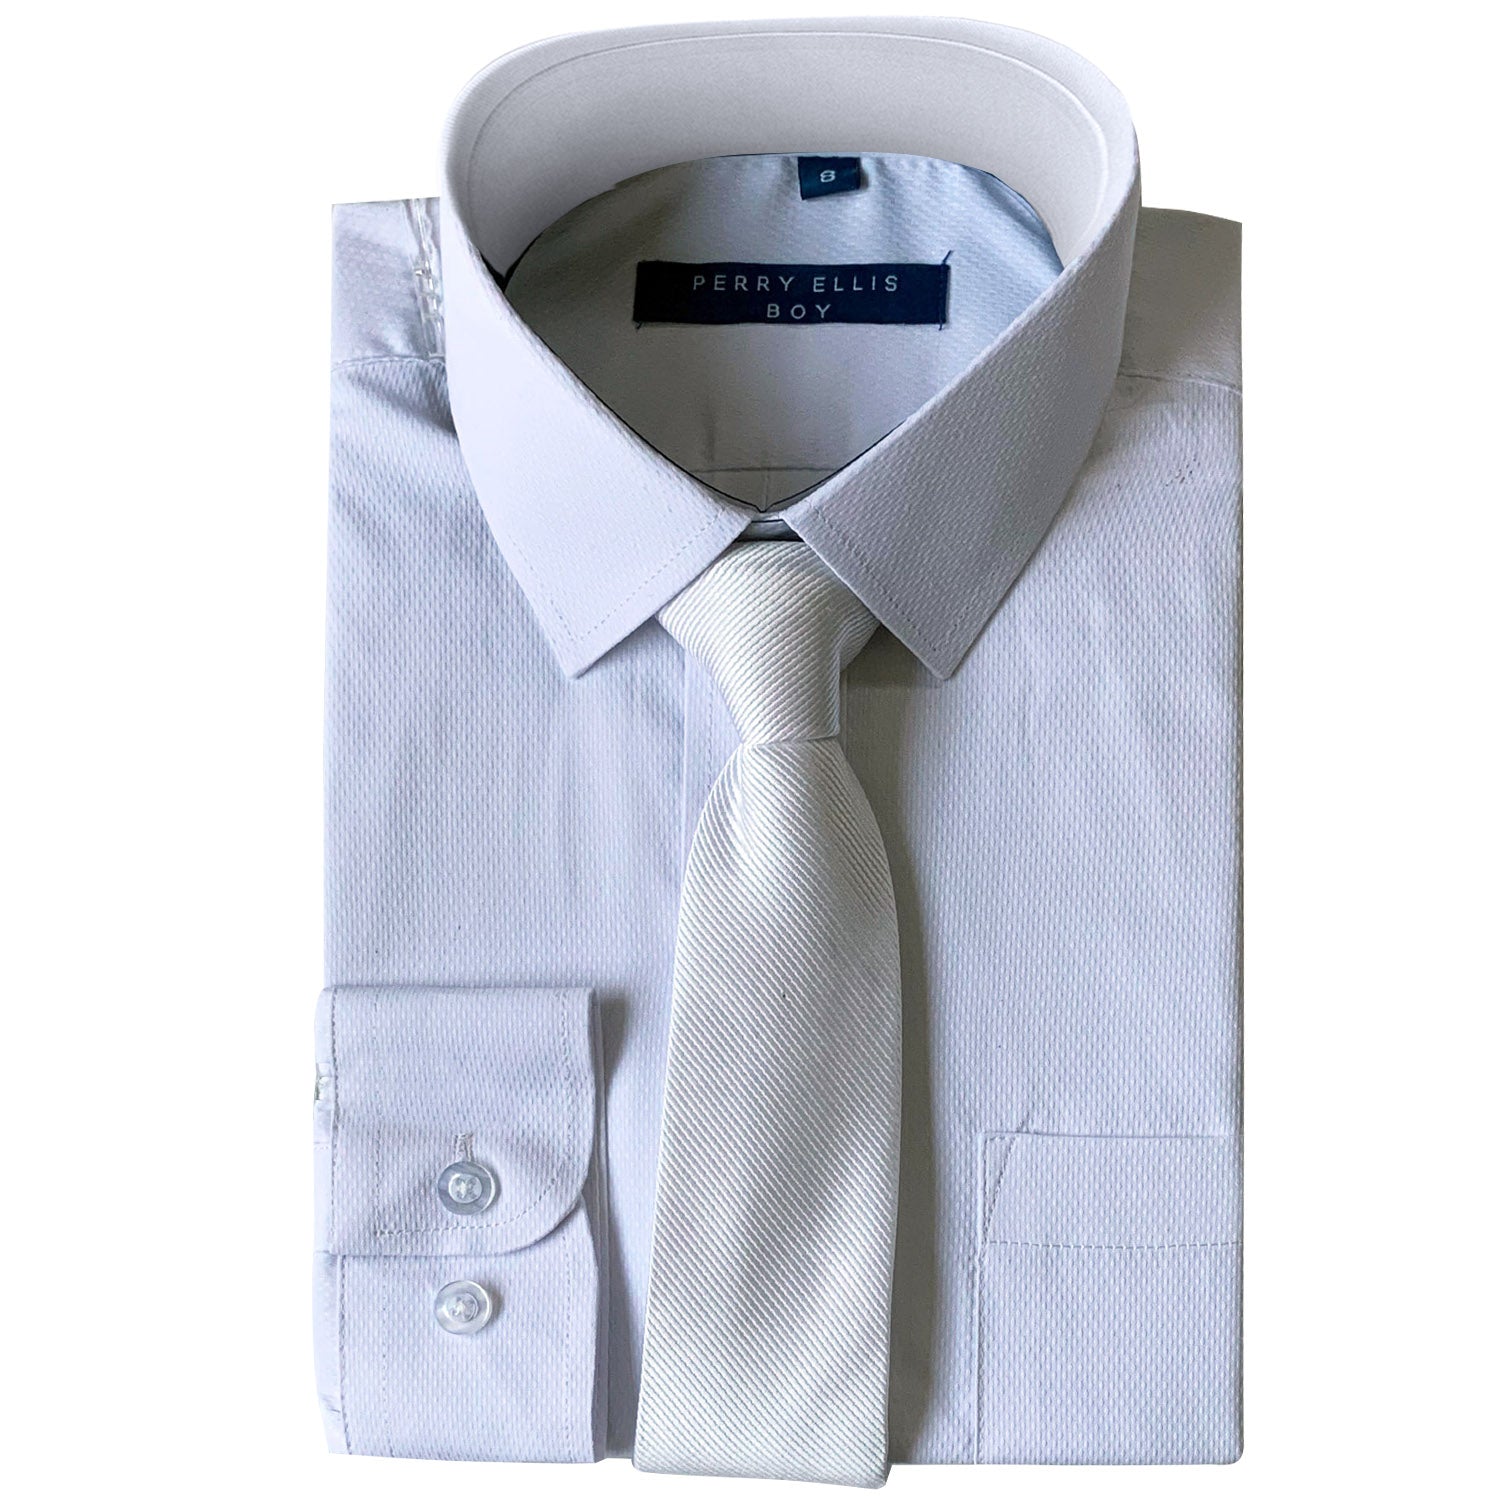 Perry Ellis Boys Dress Shirts w White Tie Solid Shirts w Colored Tie